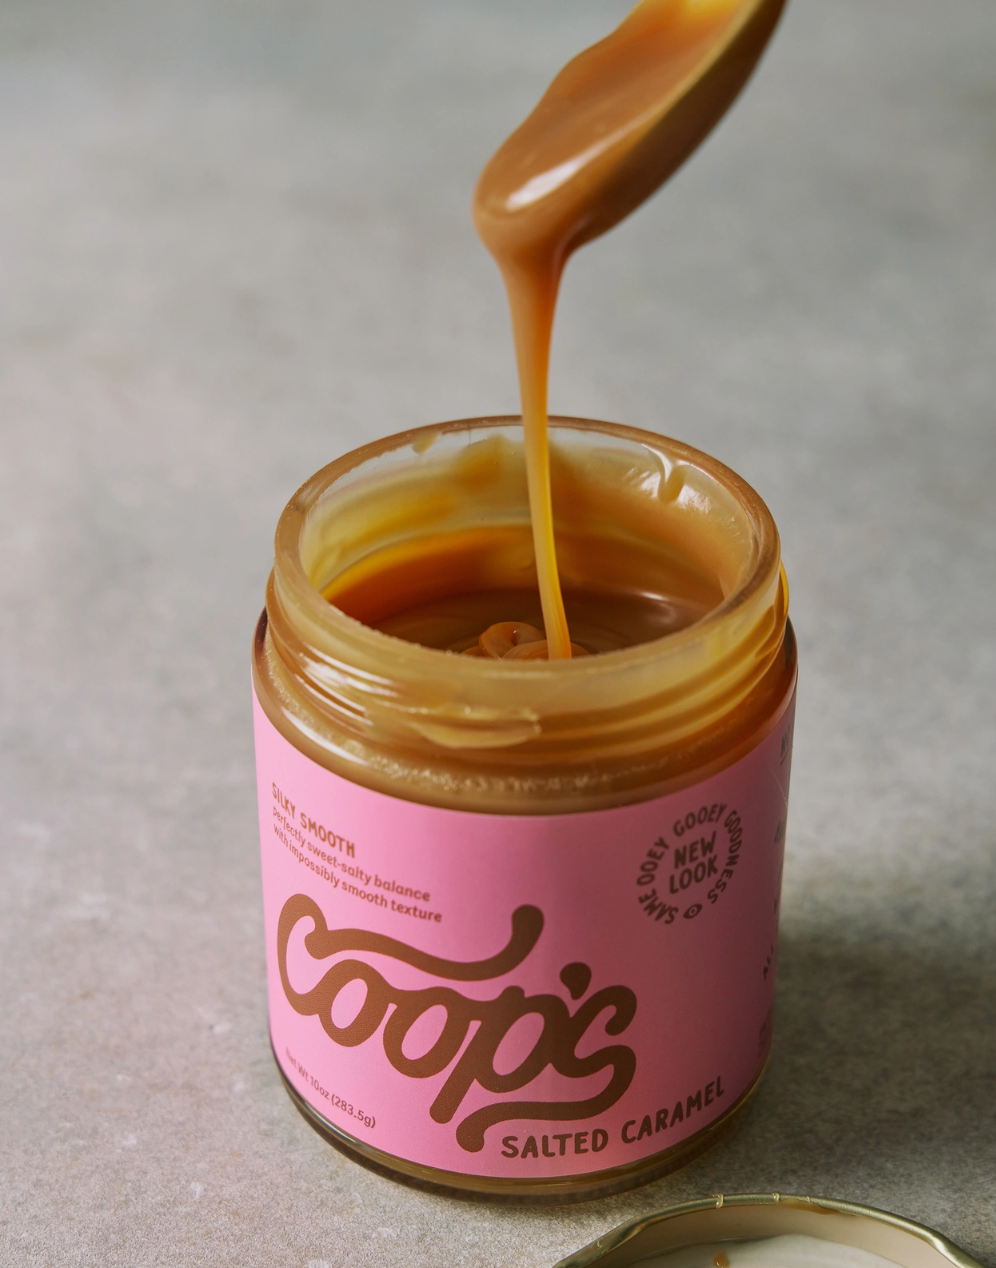 Salted Caramel Sauce by Coop's